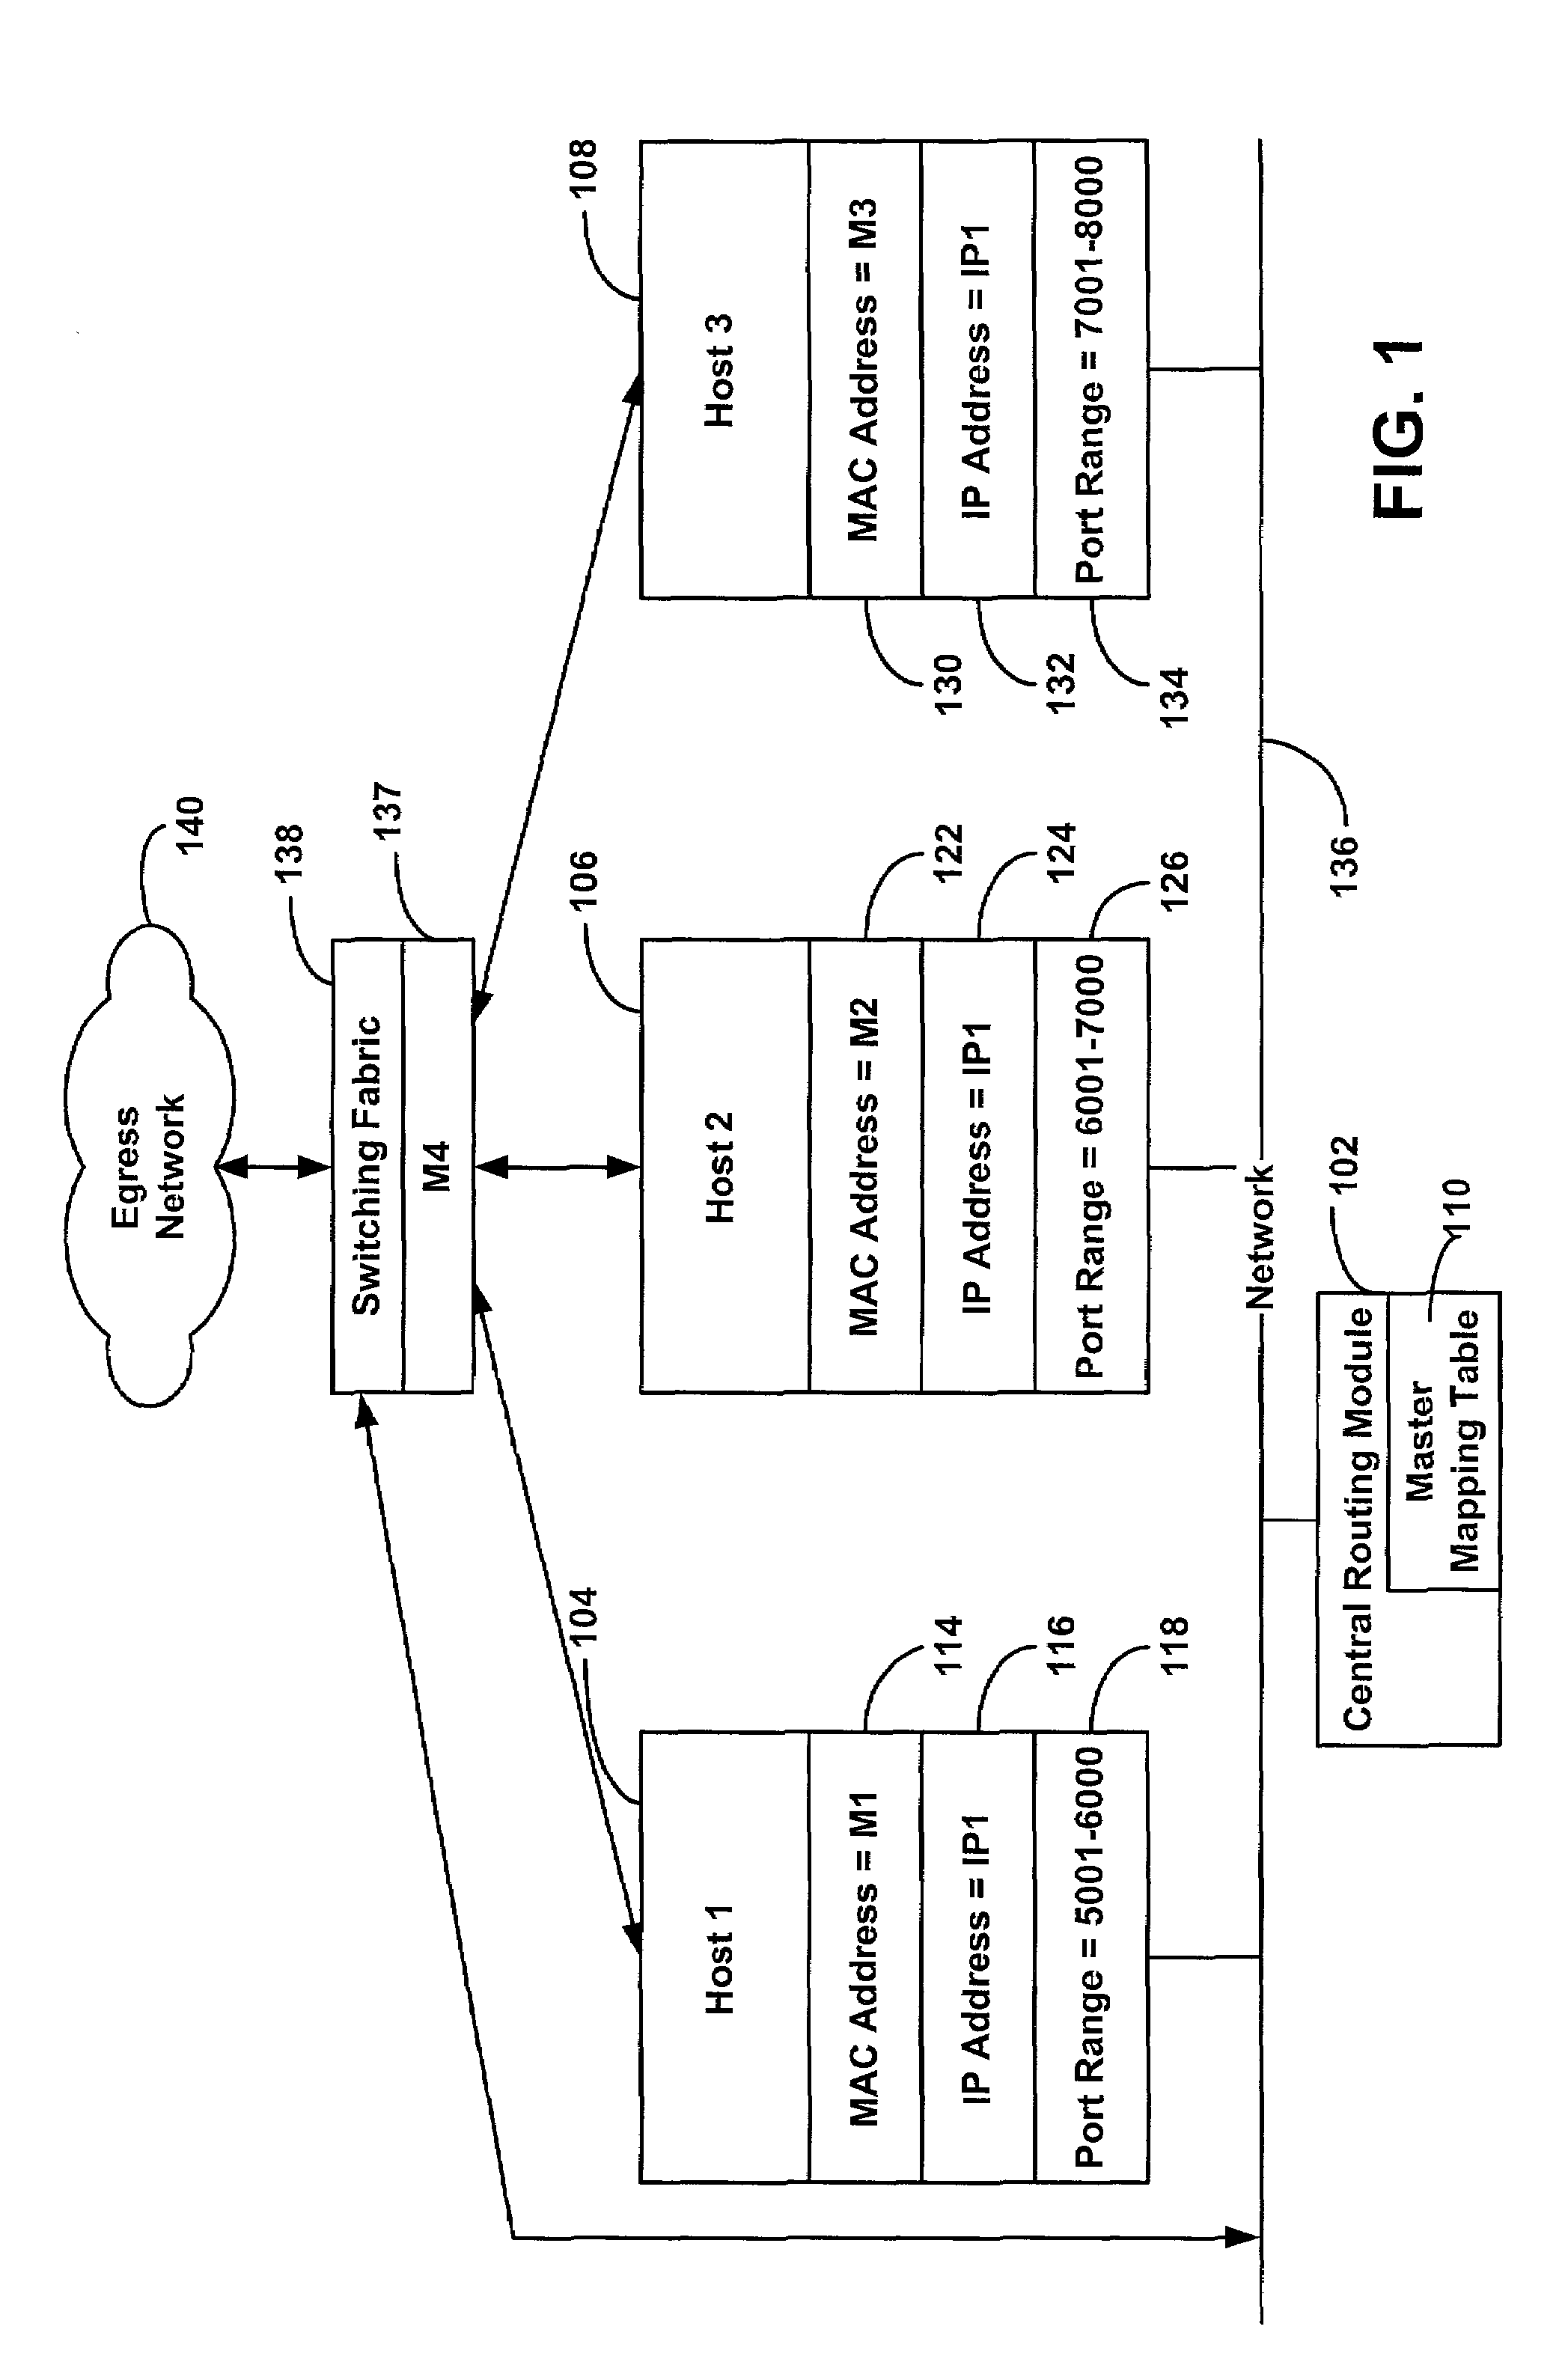 System and method for providing masquerading using a multiprotocol label switching